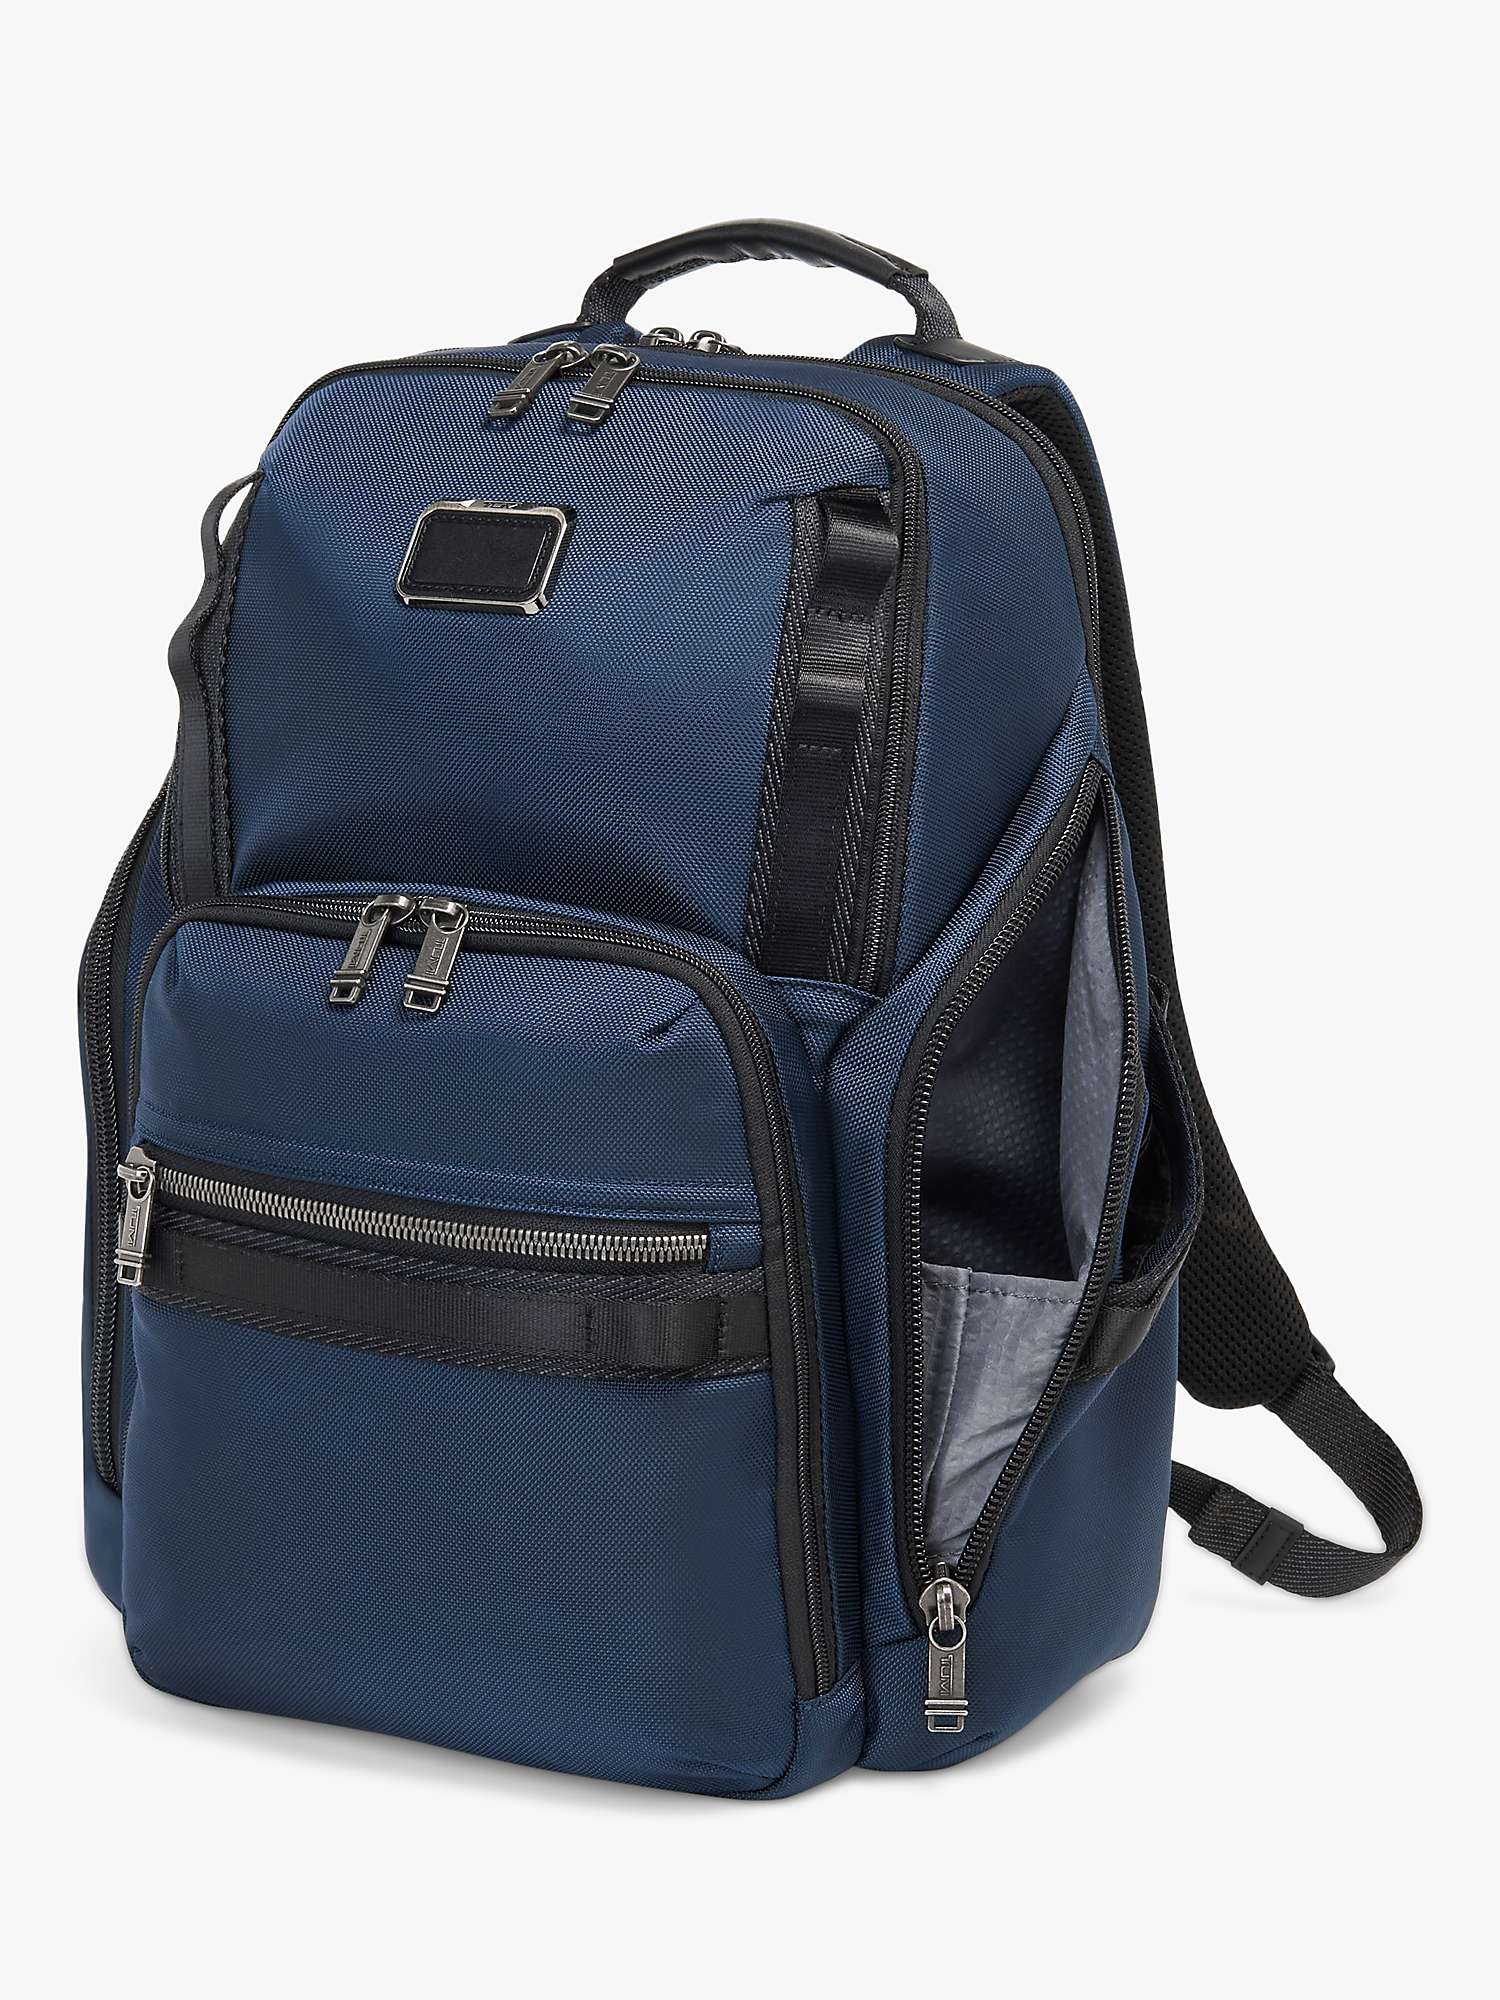 Buy TUMI Alpha Bravo Search Backpack Online at johnlewis.com